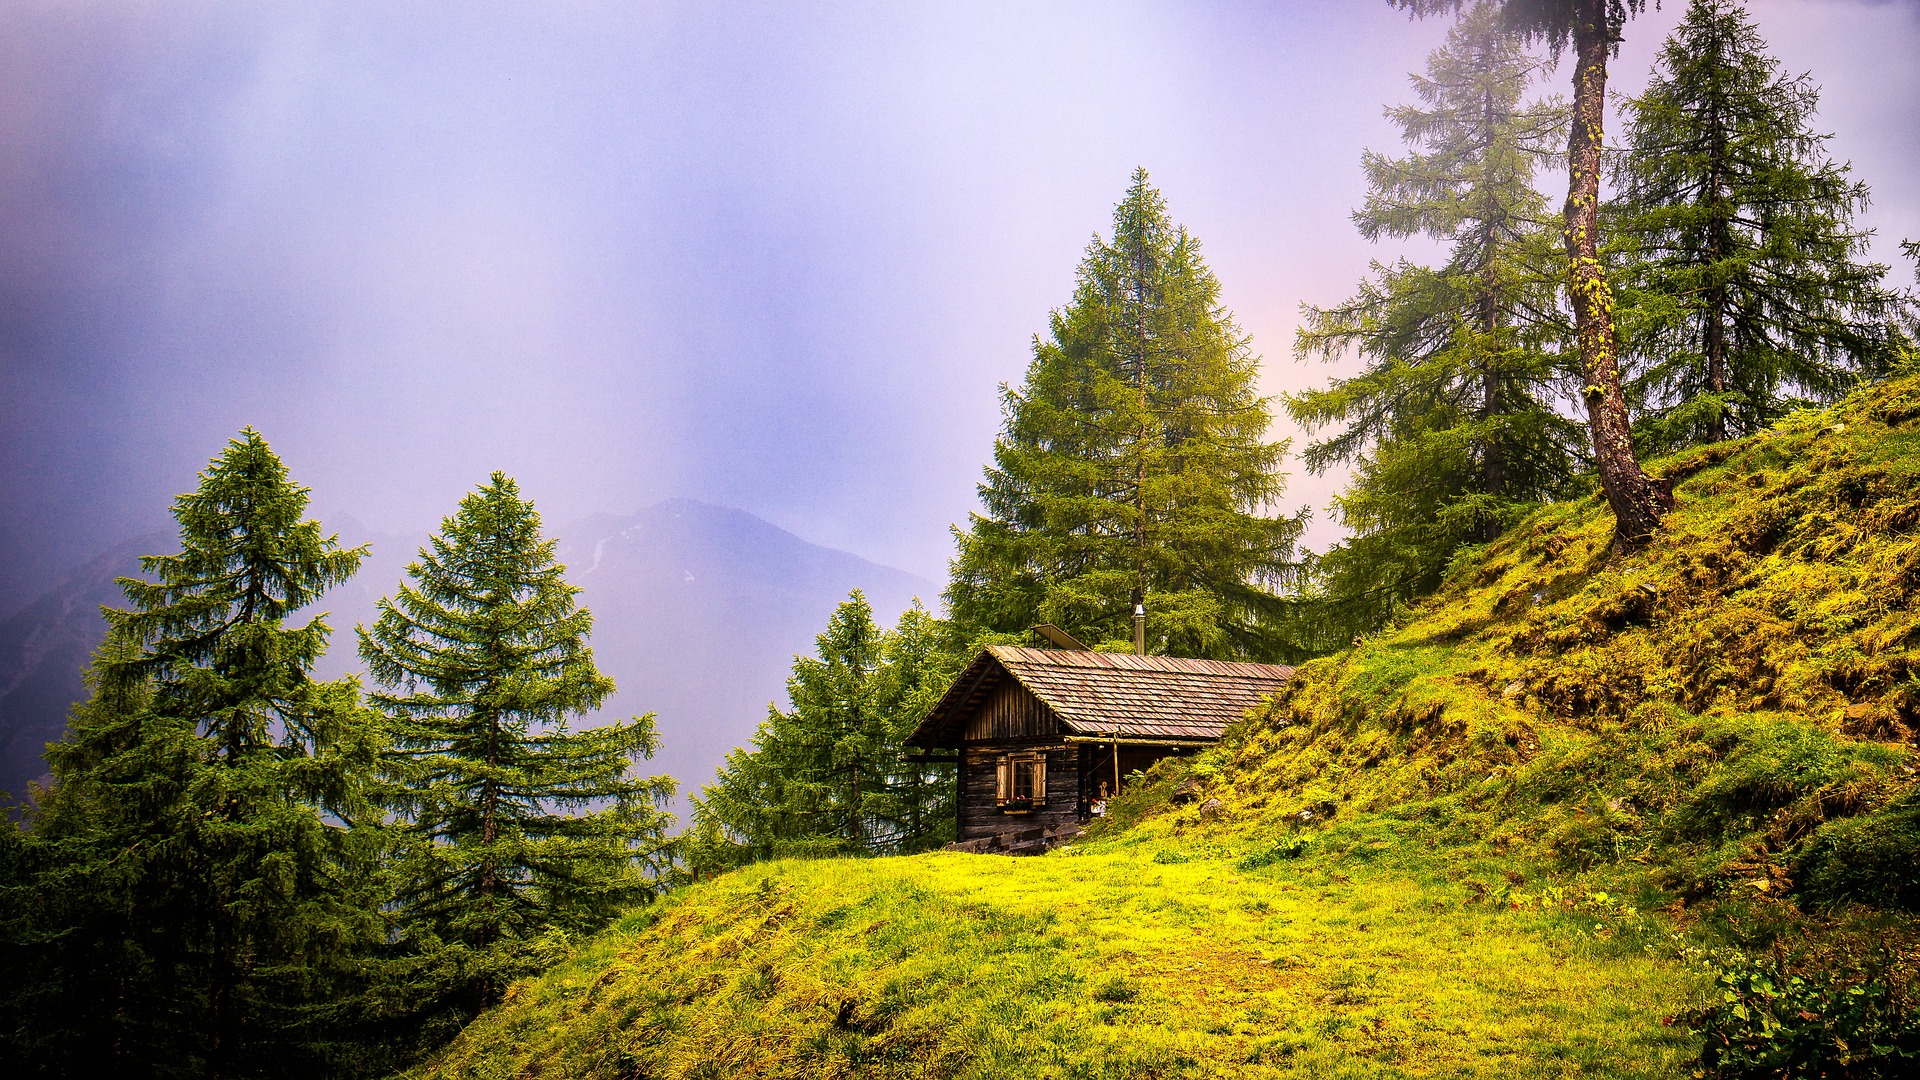 Evergreen forest and hut